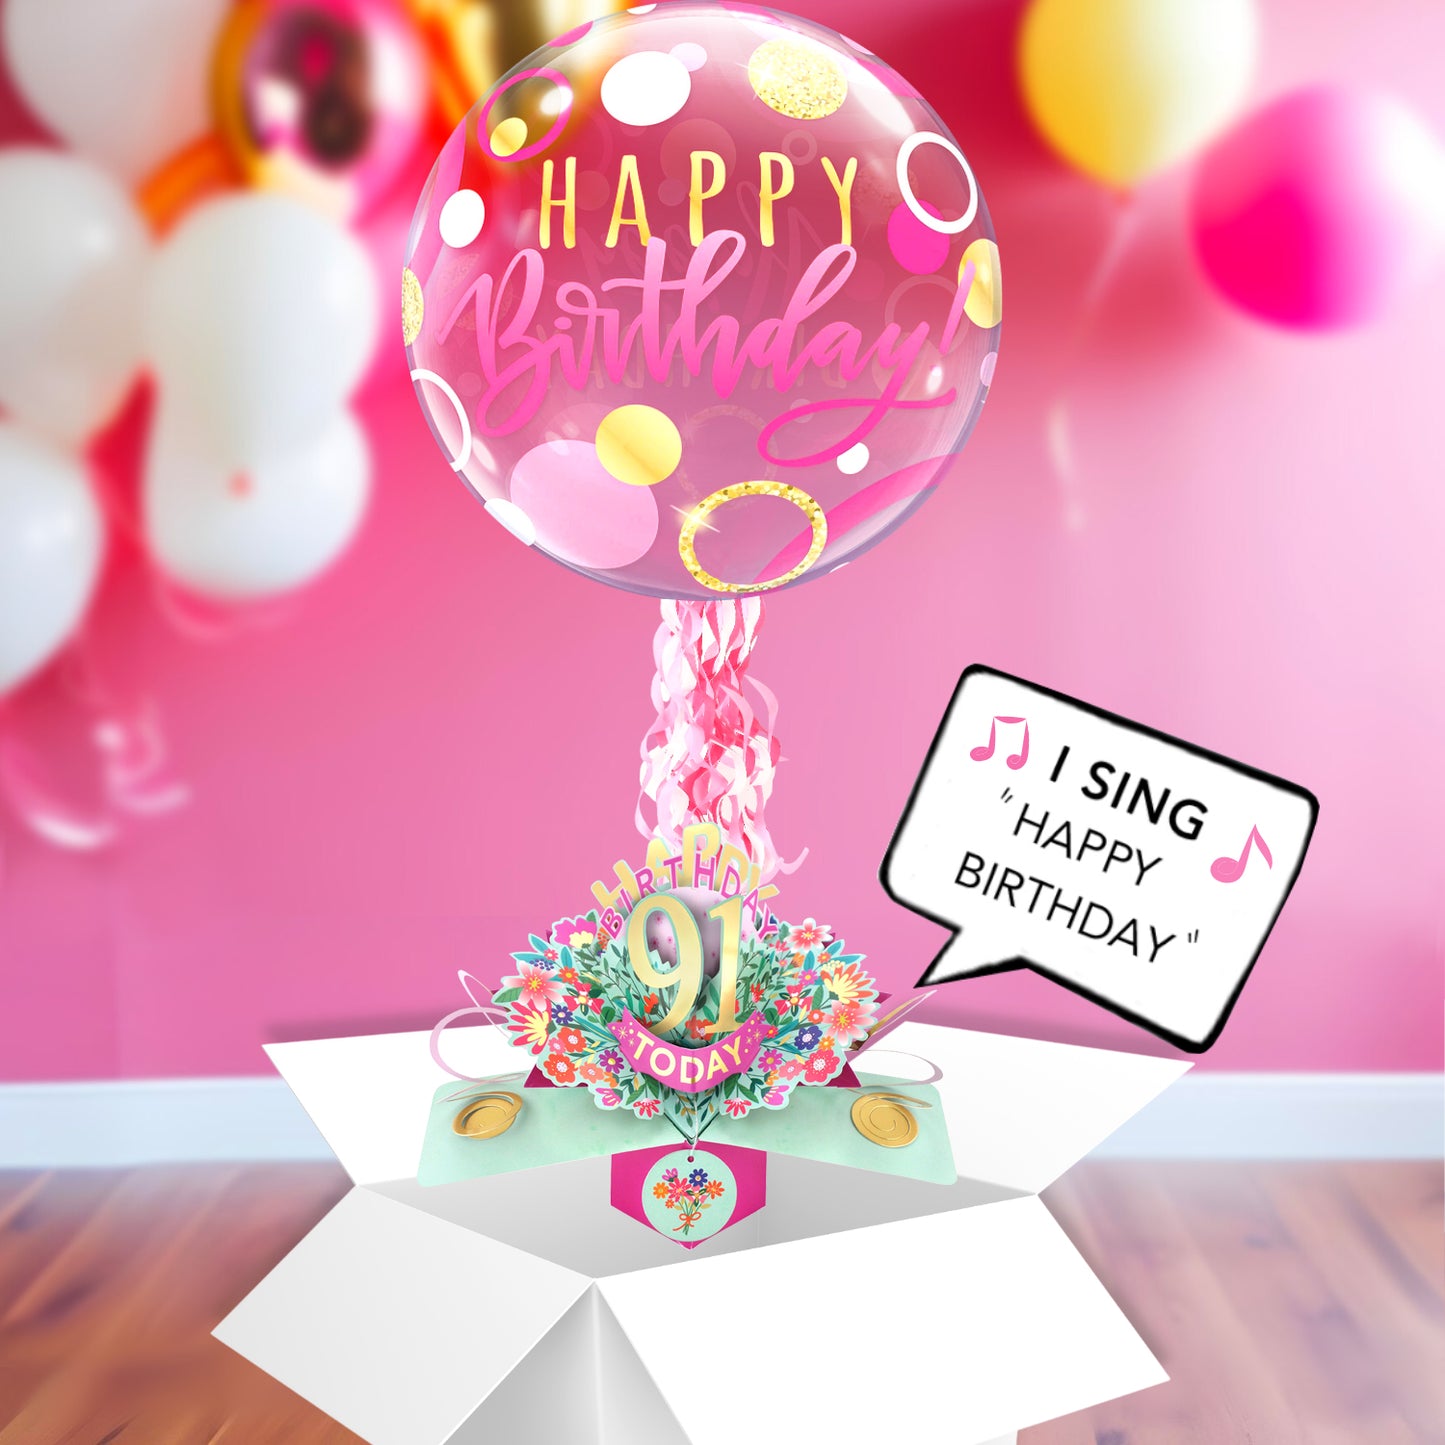 91st Birthday Pop Up Card & Musical Balloon Surprise Delivered In A Box For Her